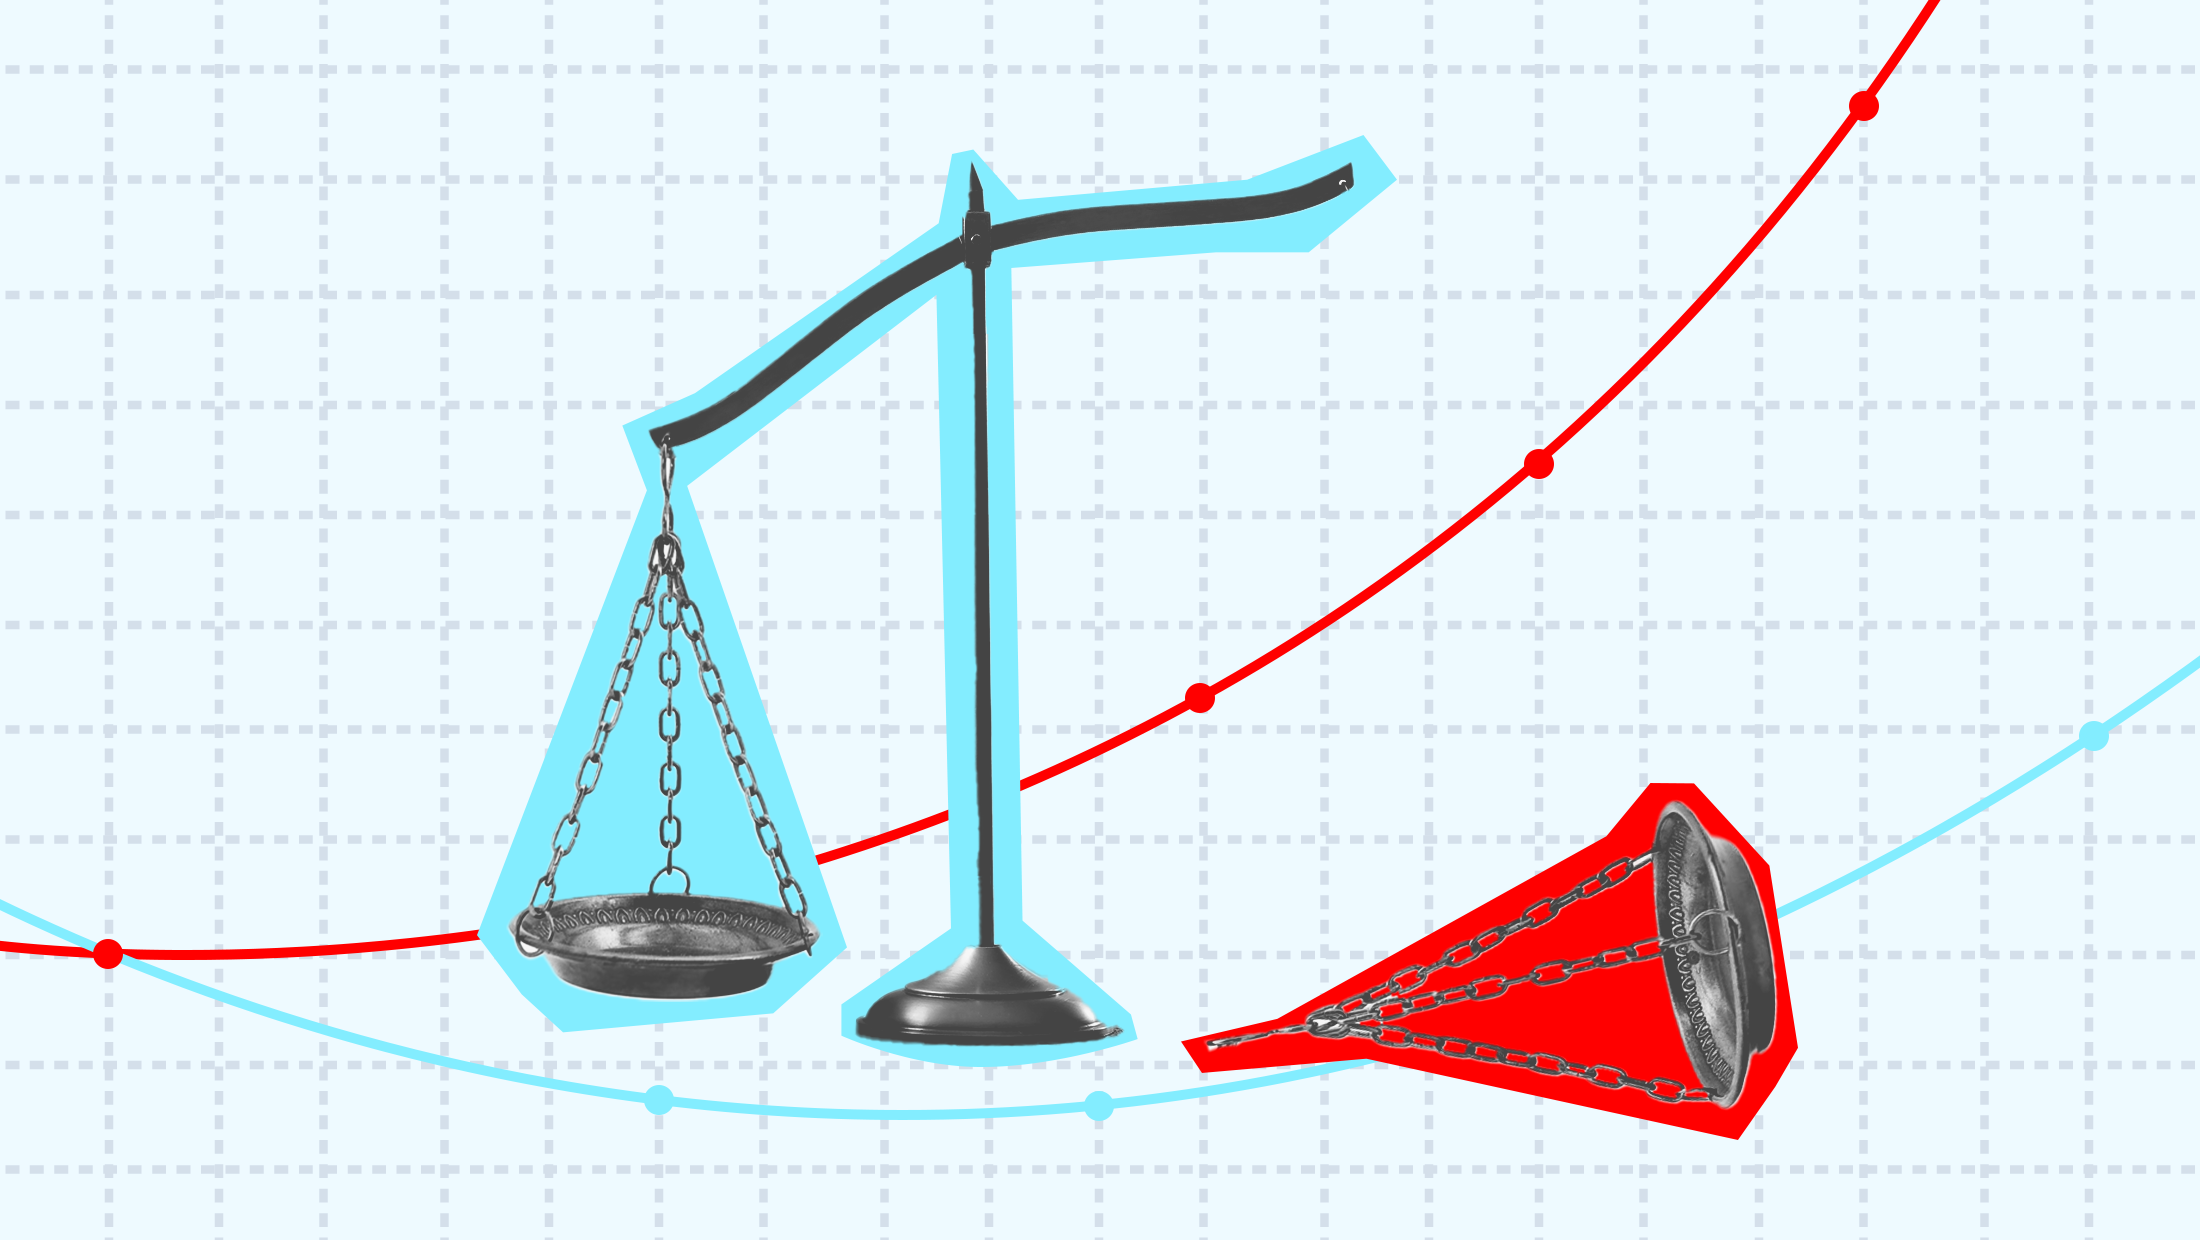 A broken scale with one side colored light blue and the other red on a background of graph paper with a red trend line and a blue trend line.